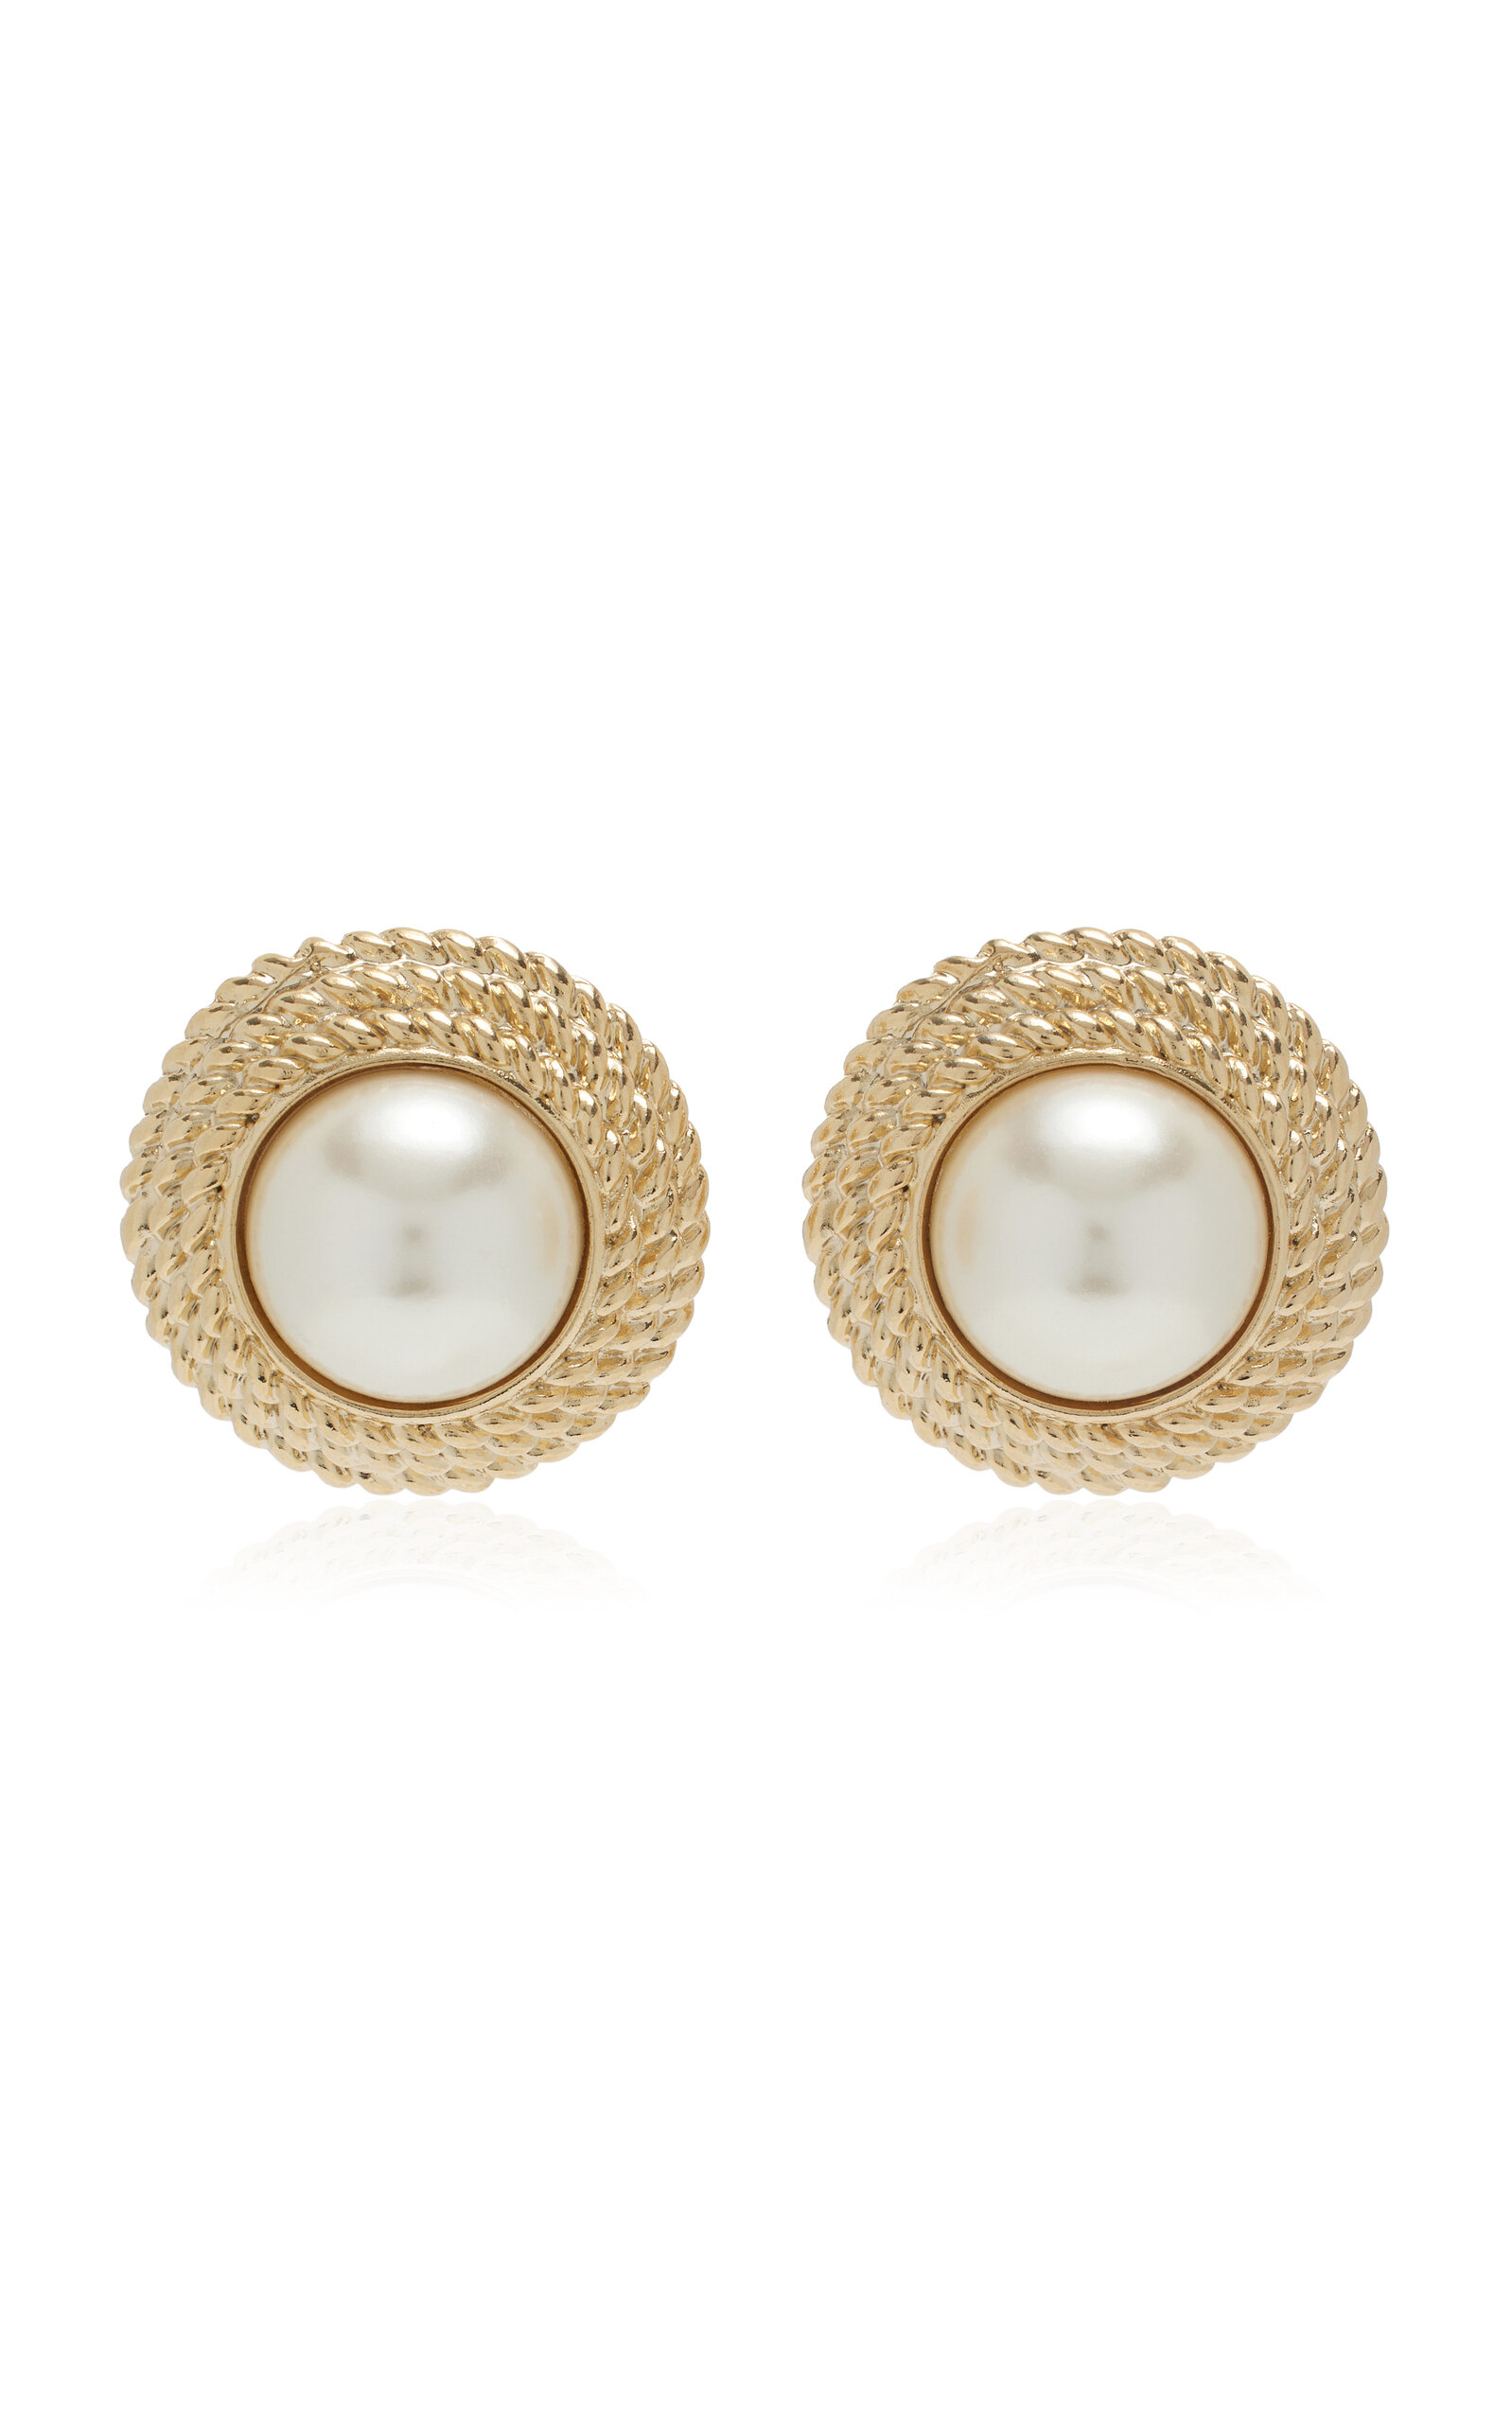 Ben-amun Exclusive 80s 24k White Gold-plated Pearl Earrings